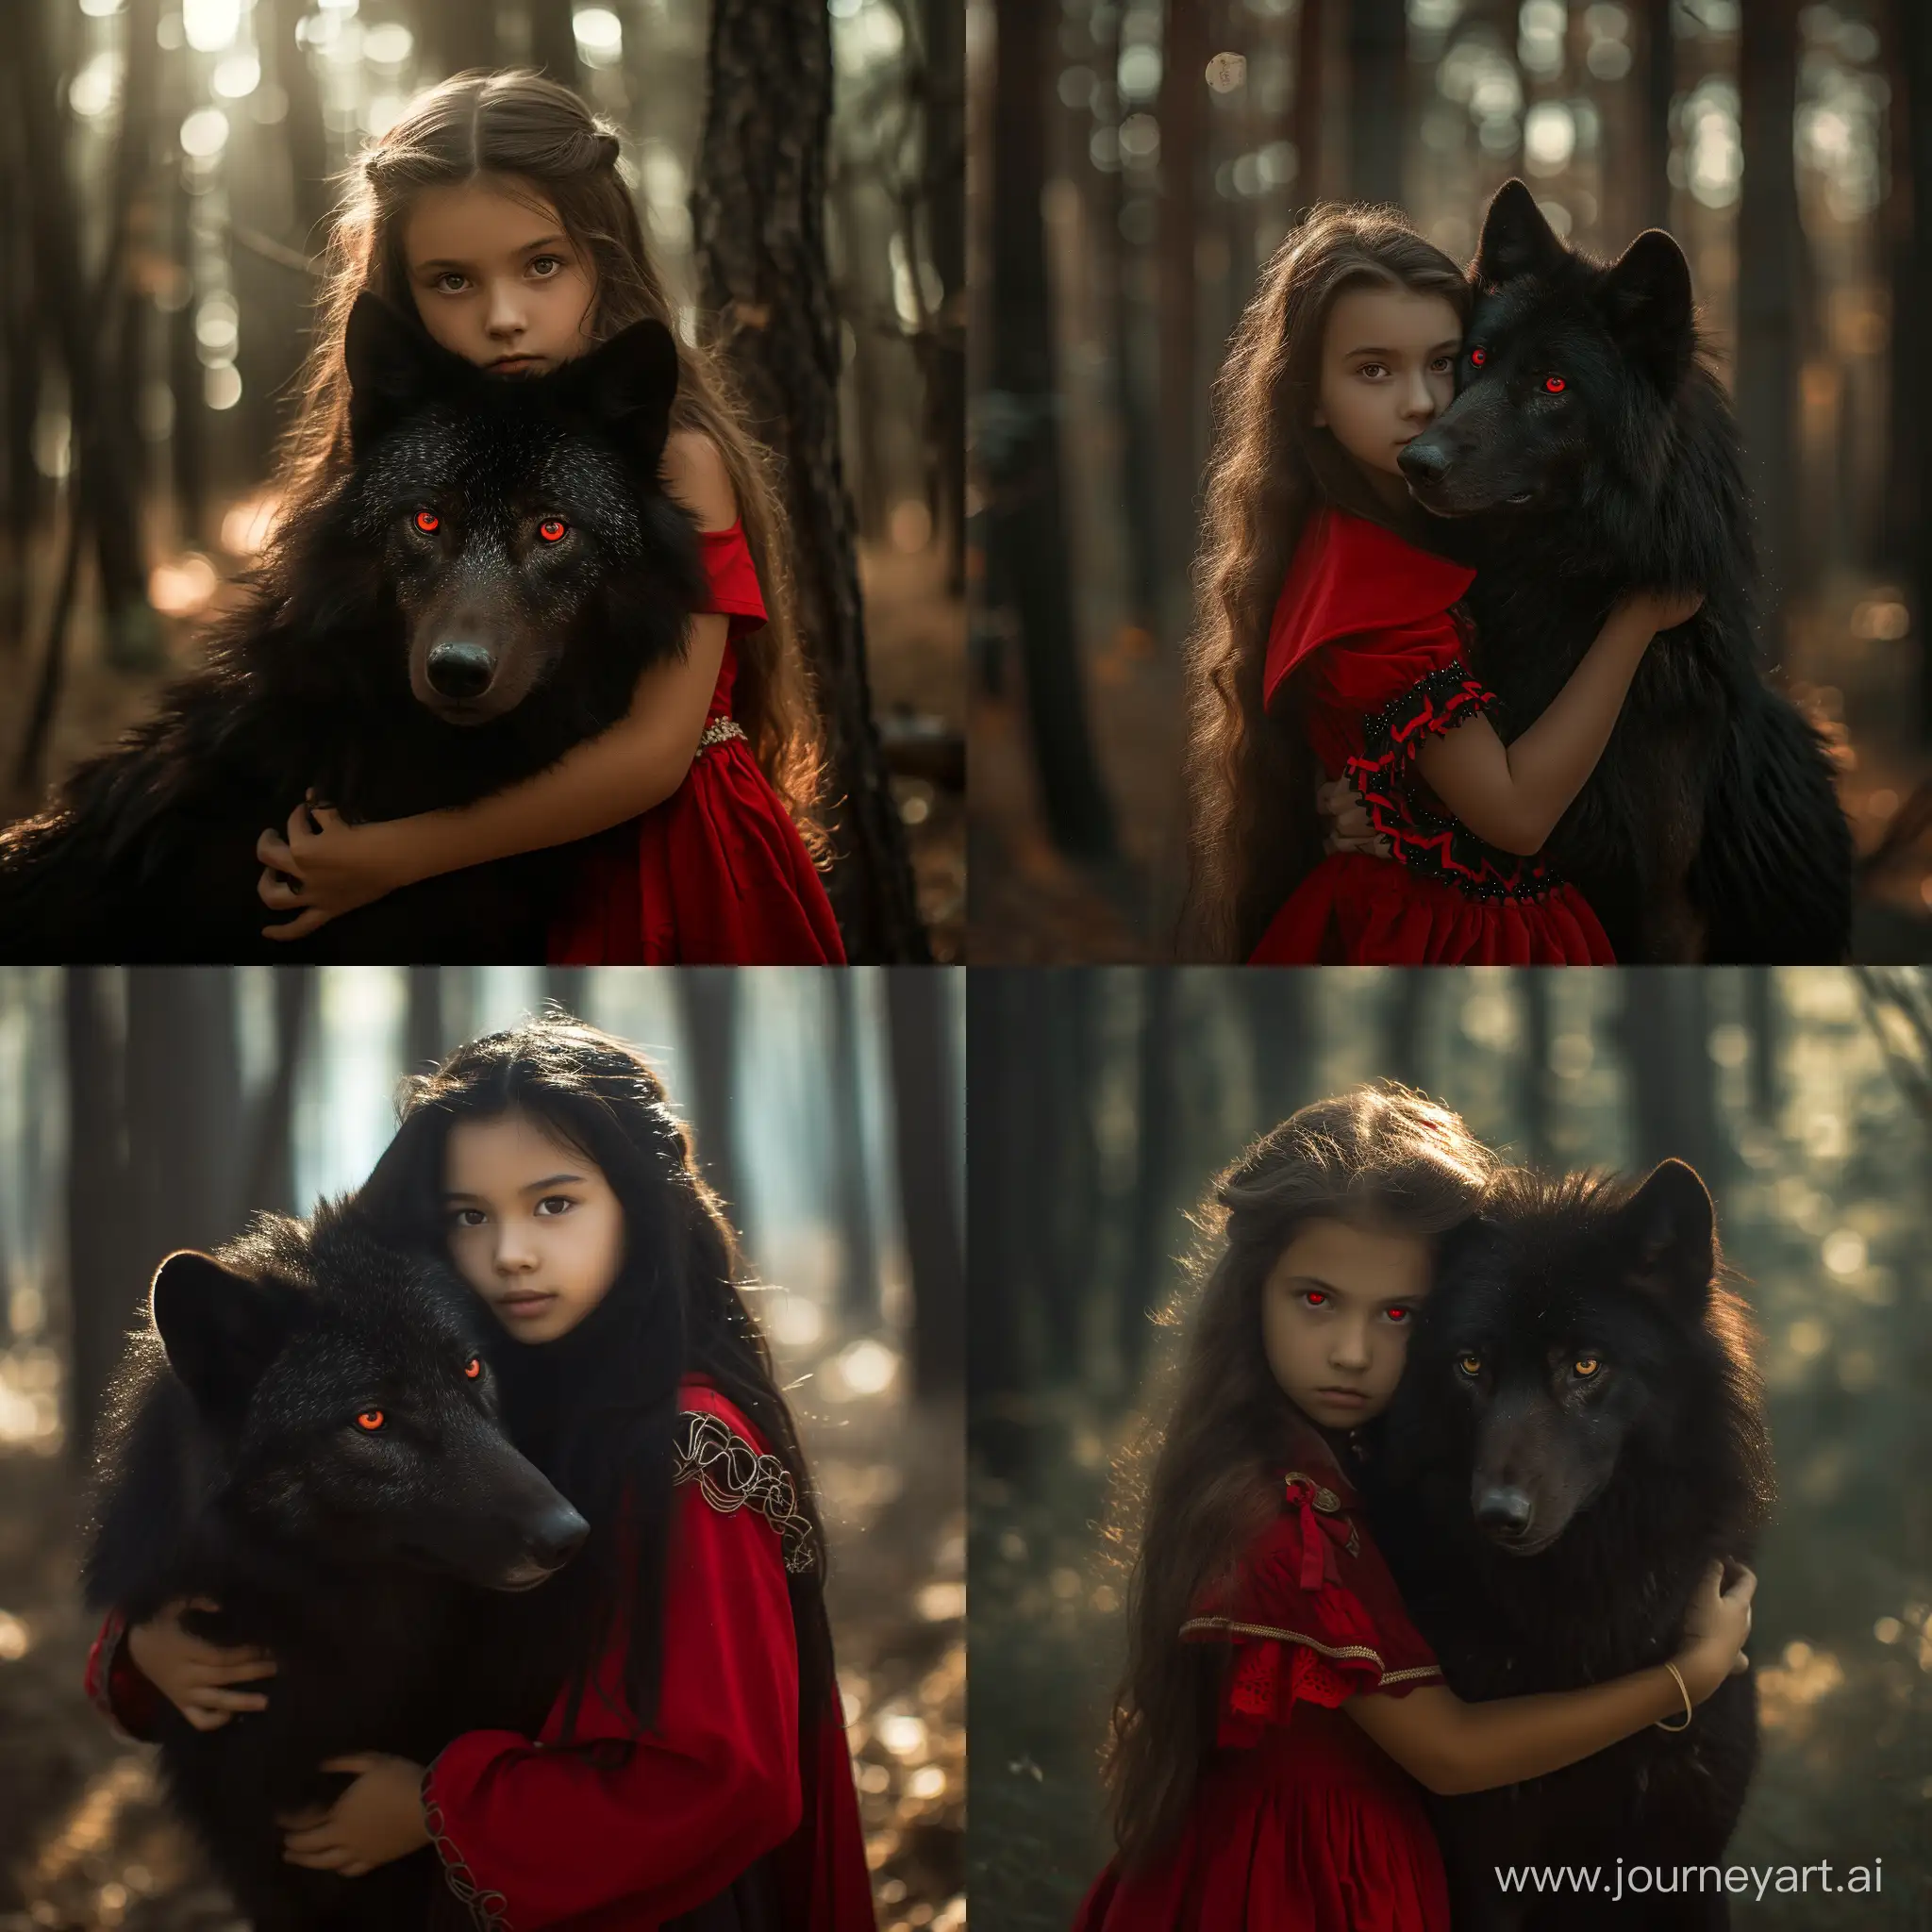 Fearless-Little-Red-Riding-Hood-Confronts-Aggressive-Wolf-in-Enchanting-Forest-Portrait